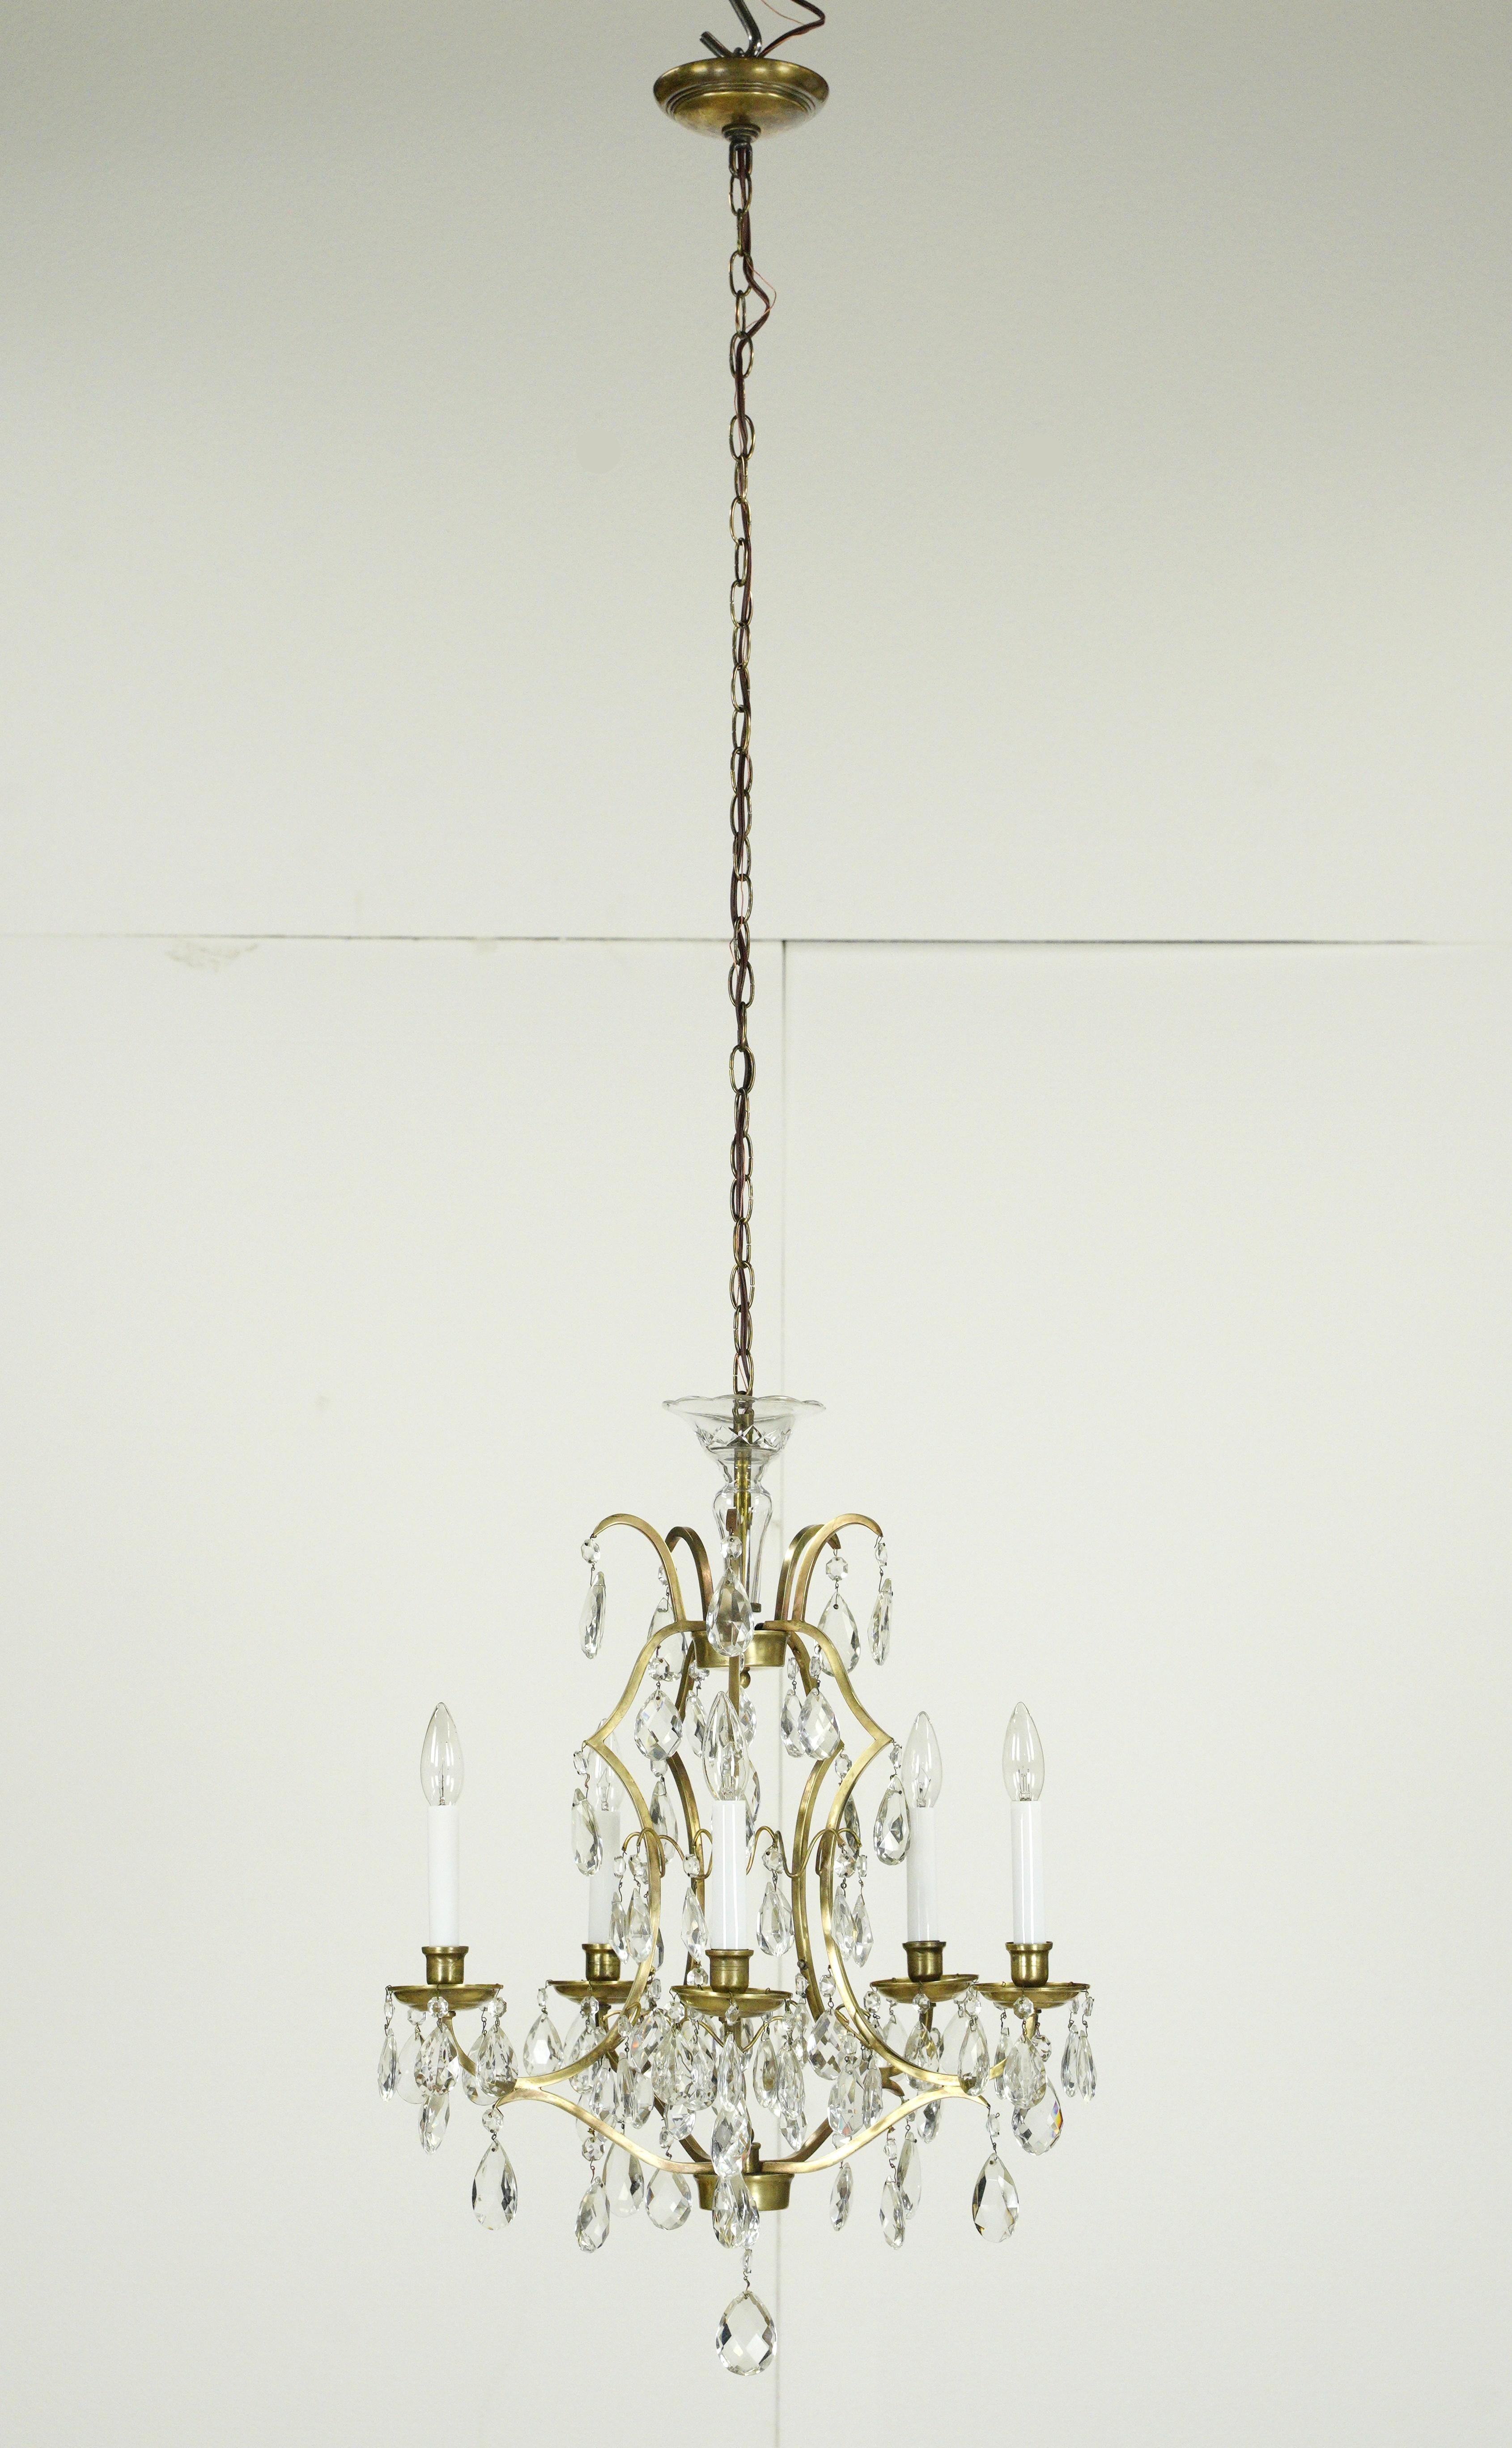 Elegant clear crystal and brass chandelier with five arms. This was acquired from the Waldorf Astoria Hotel on Park Avenue in New York City. A Waldorf Astoria authenticity card is included with your purchase. Uses five candelabra light bulbs. This